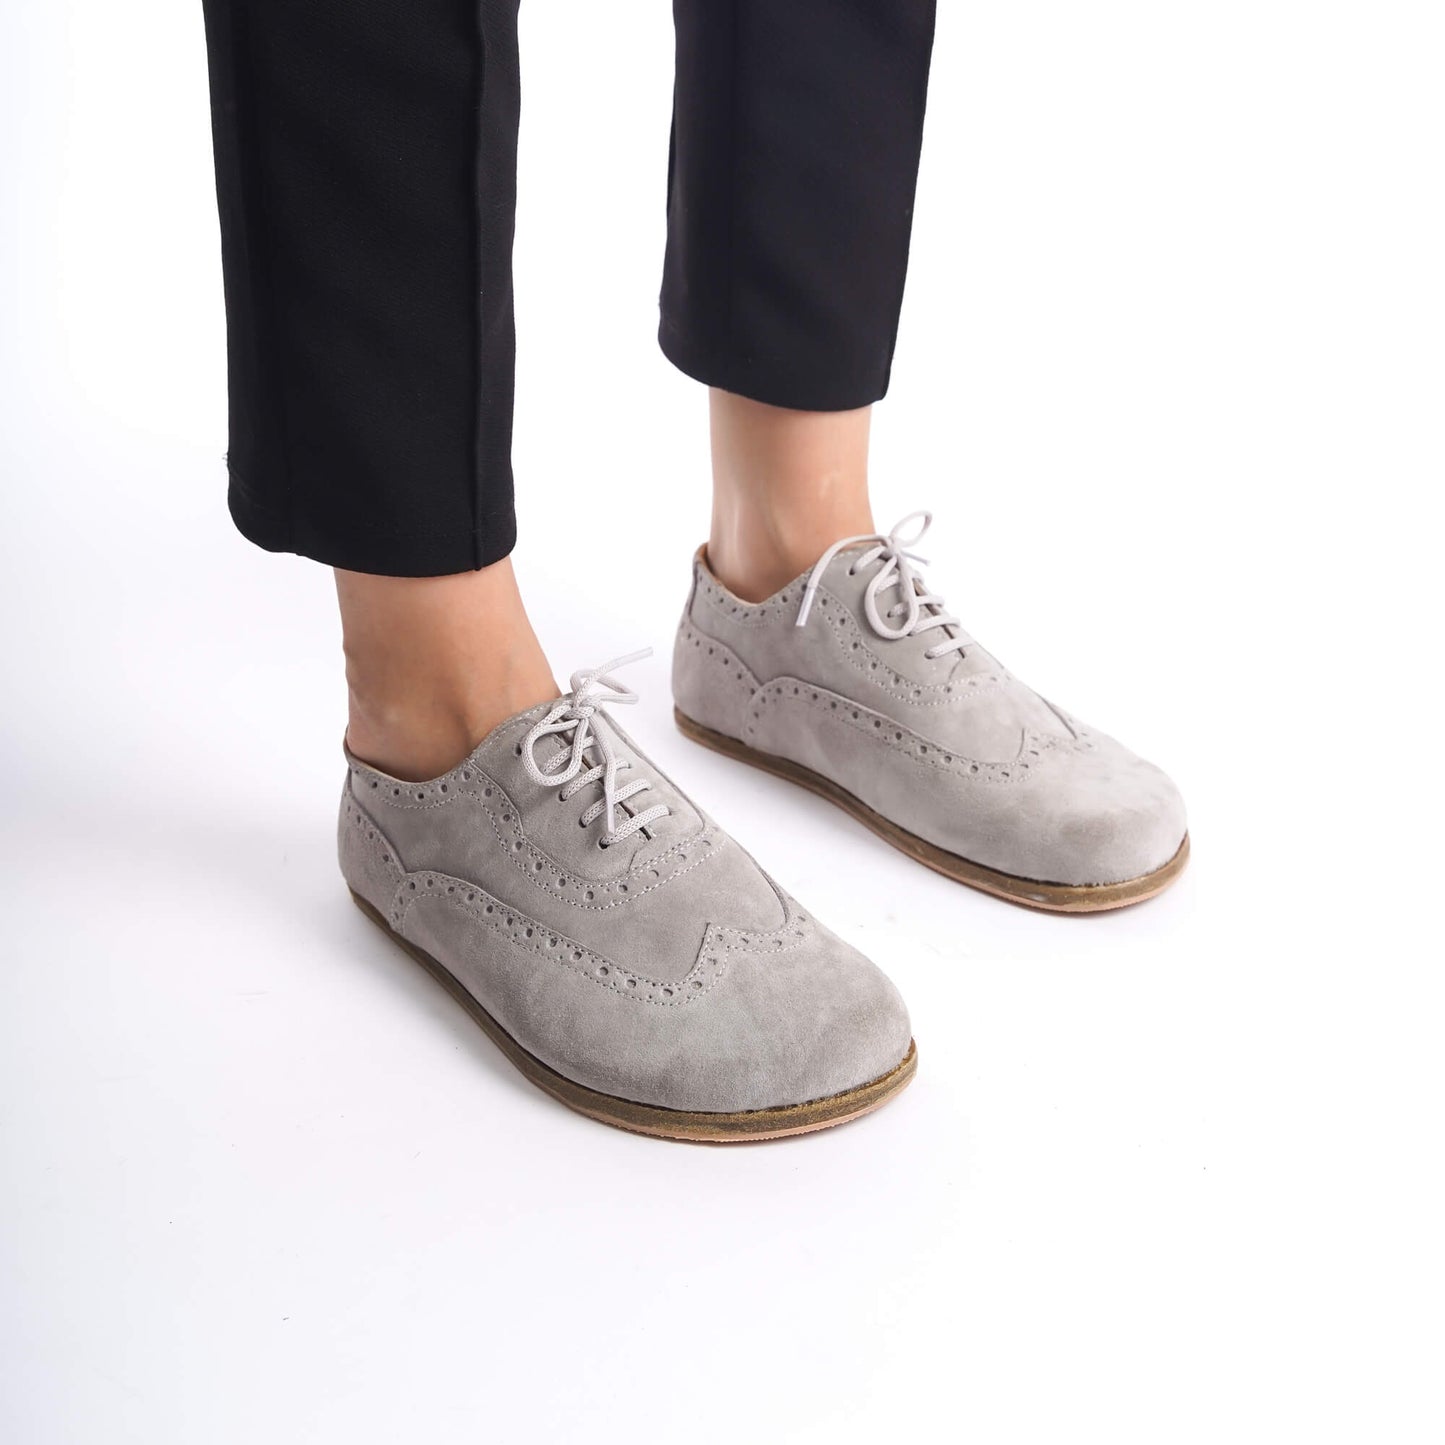 Close-up of gray Doris leather barefoot women Oxfords, highlighting the lace-up design and detailed stitching.